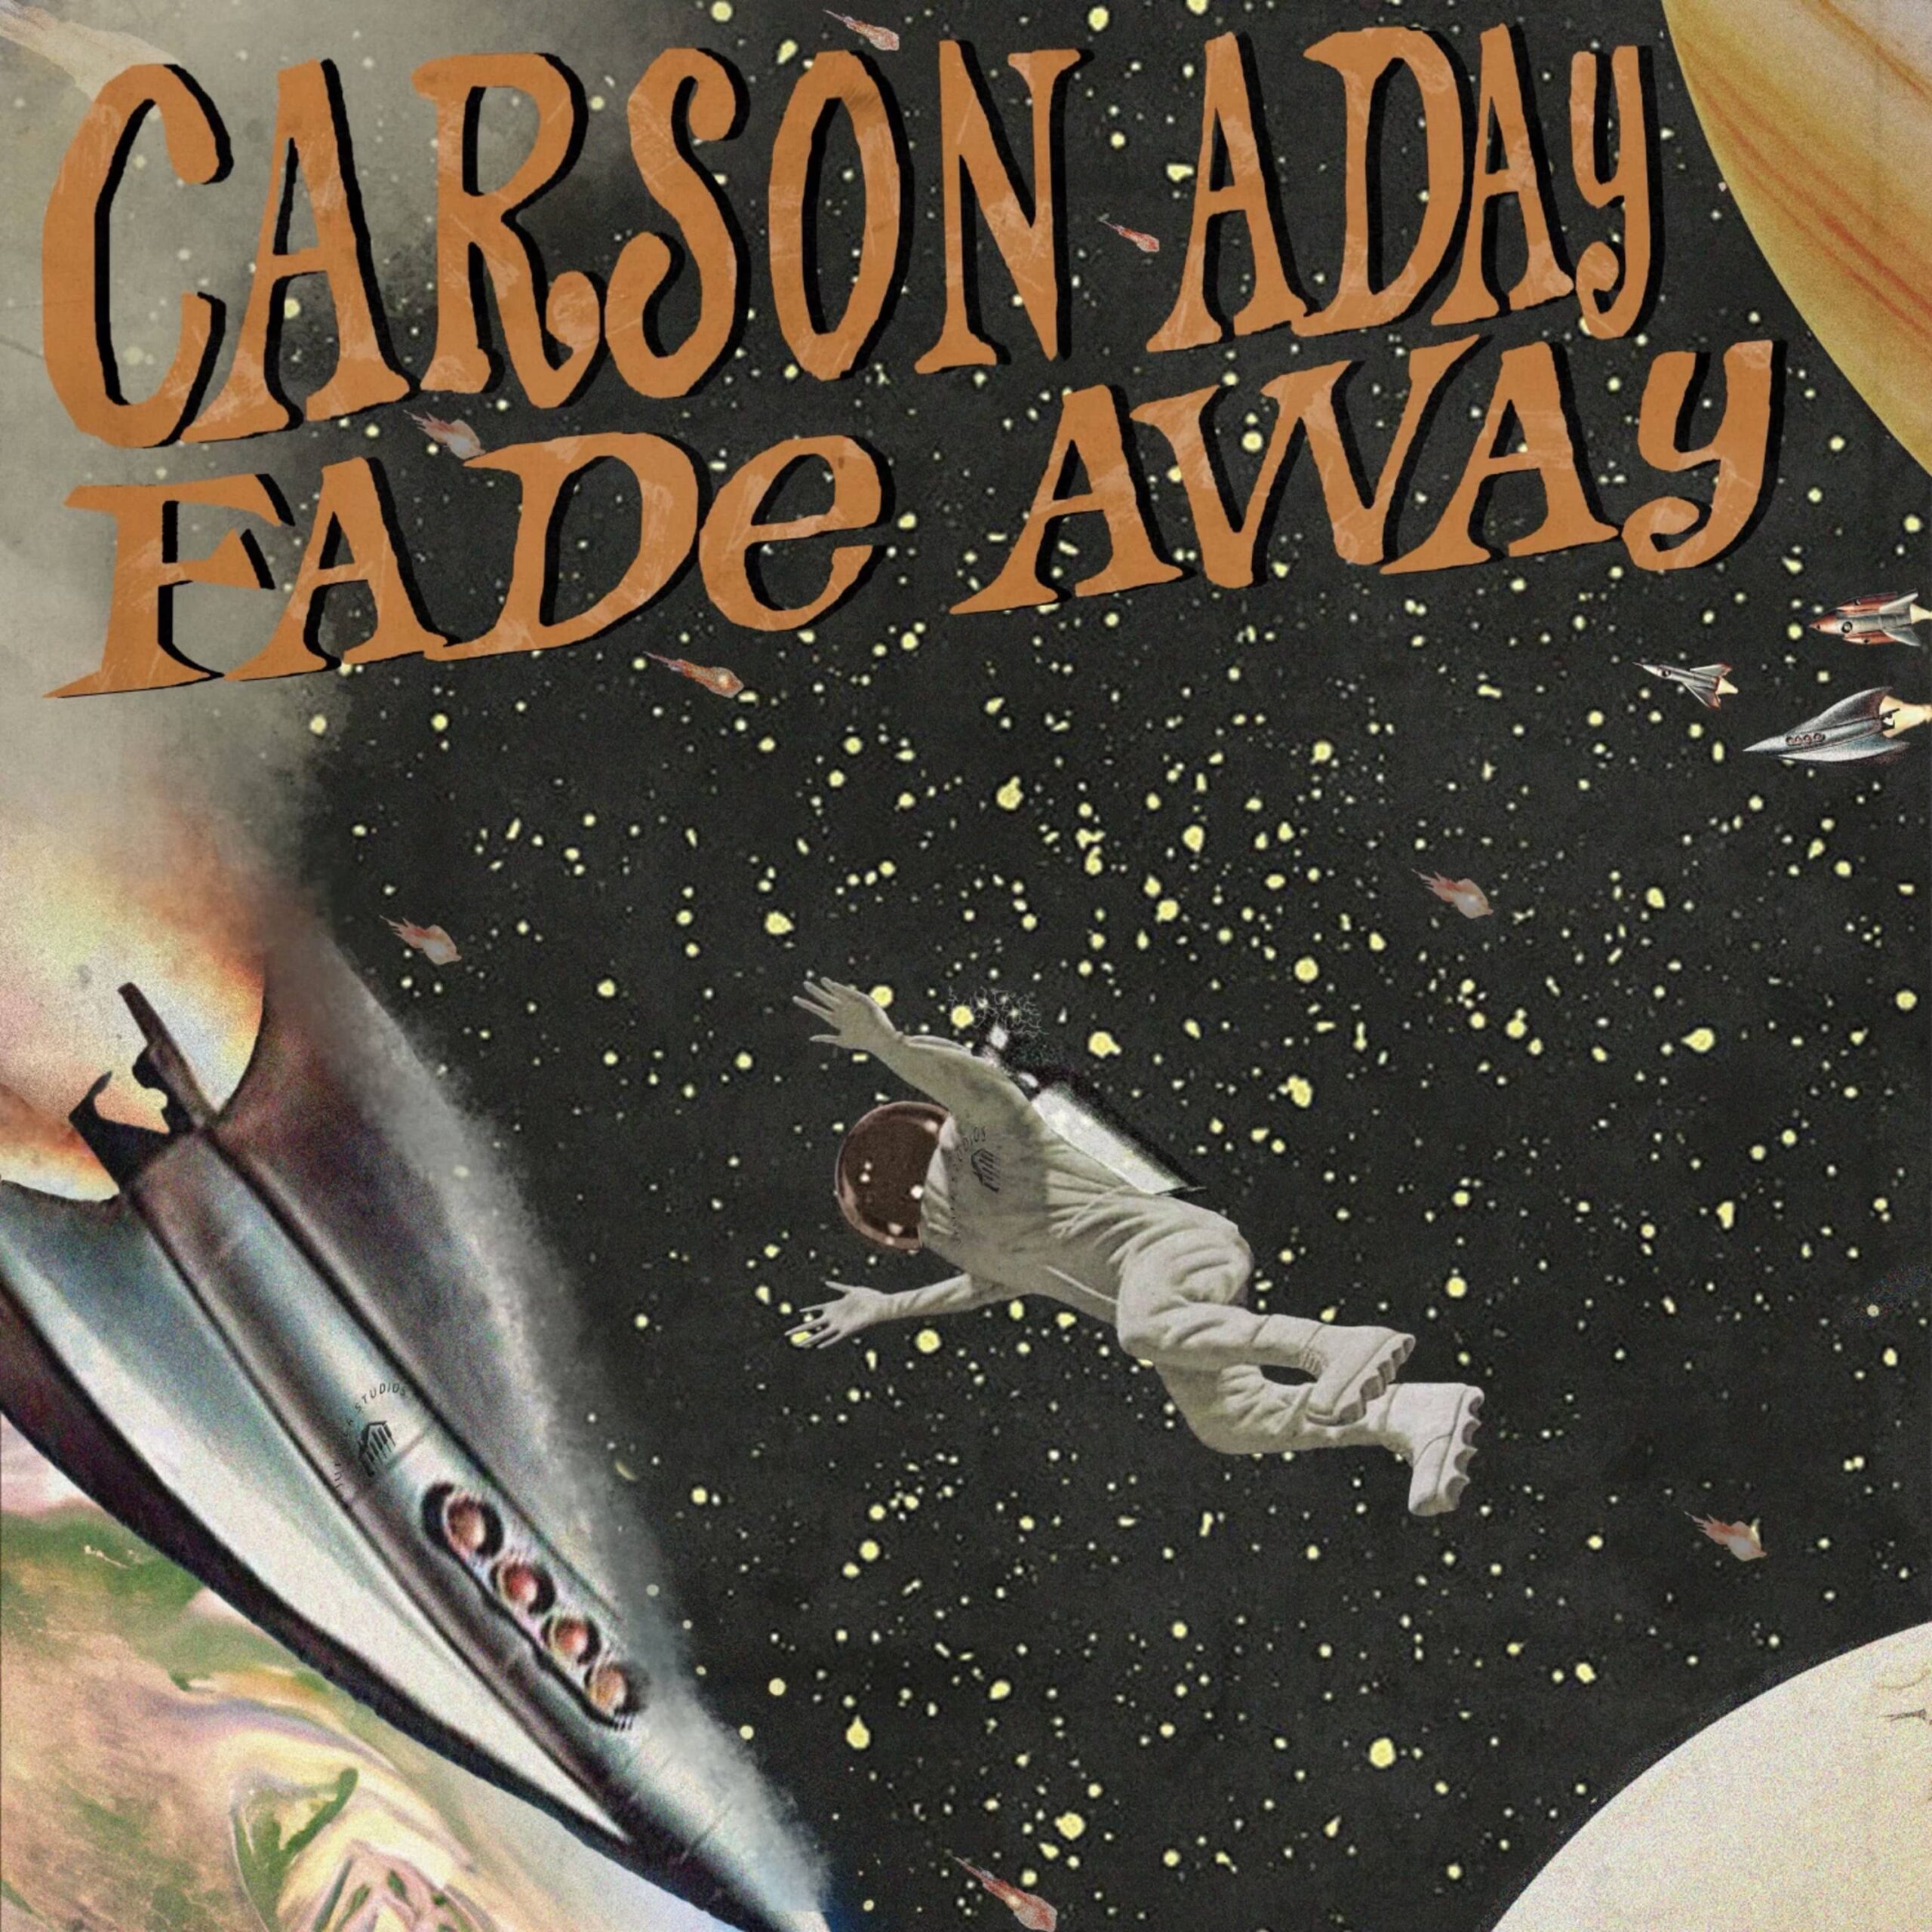 Carson Aday’s “Fade Away”: Navigating Artistic Growth Amidst Moral Turmoil